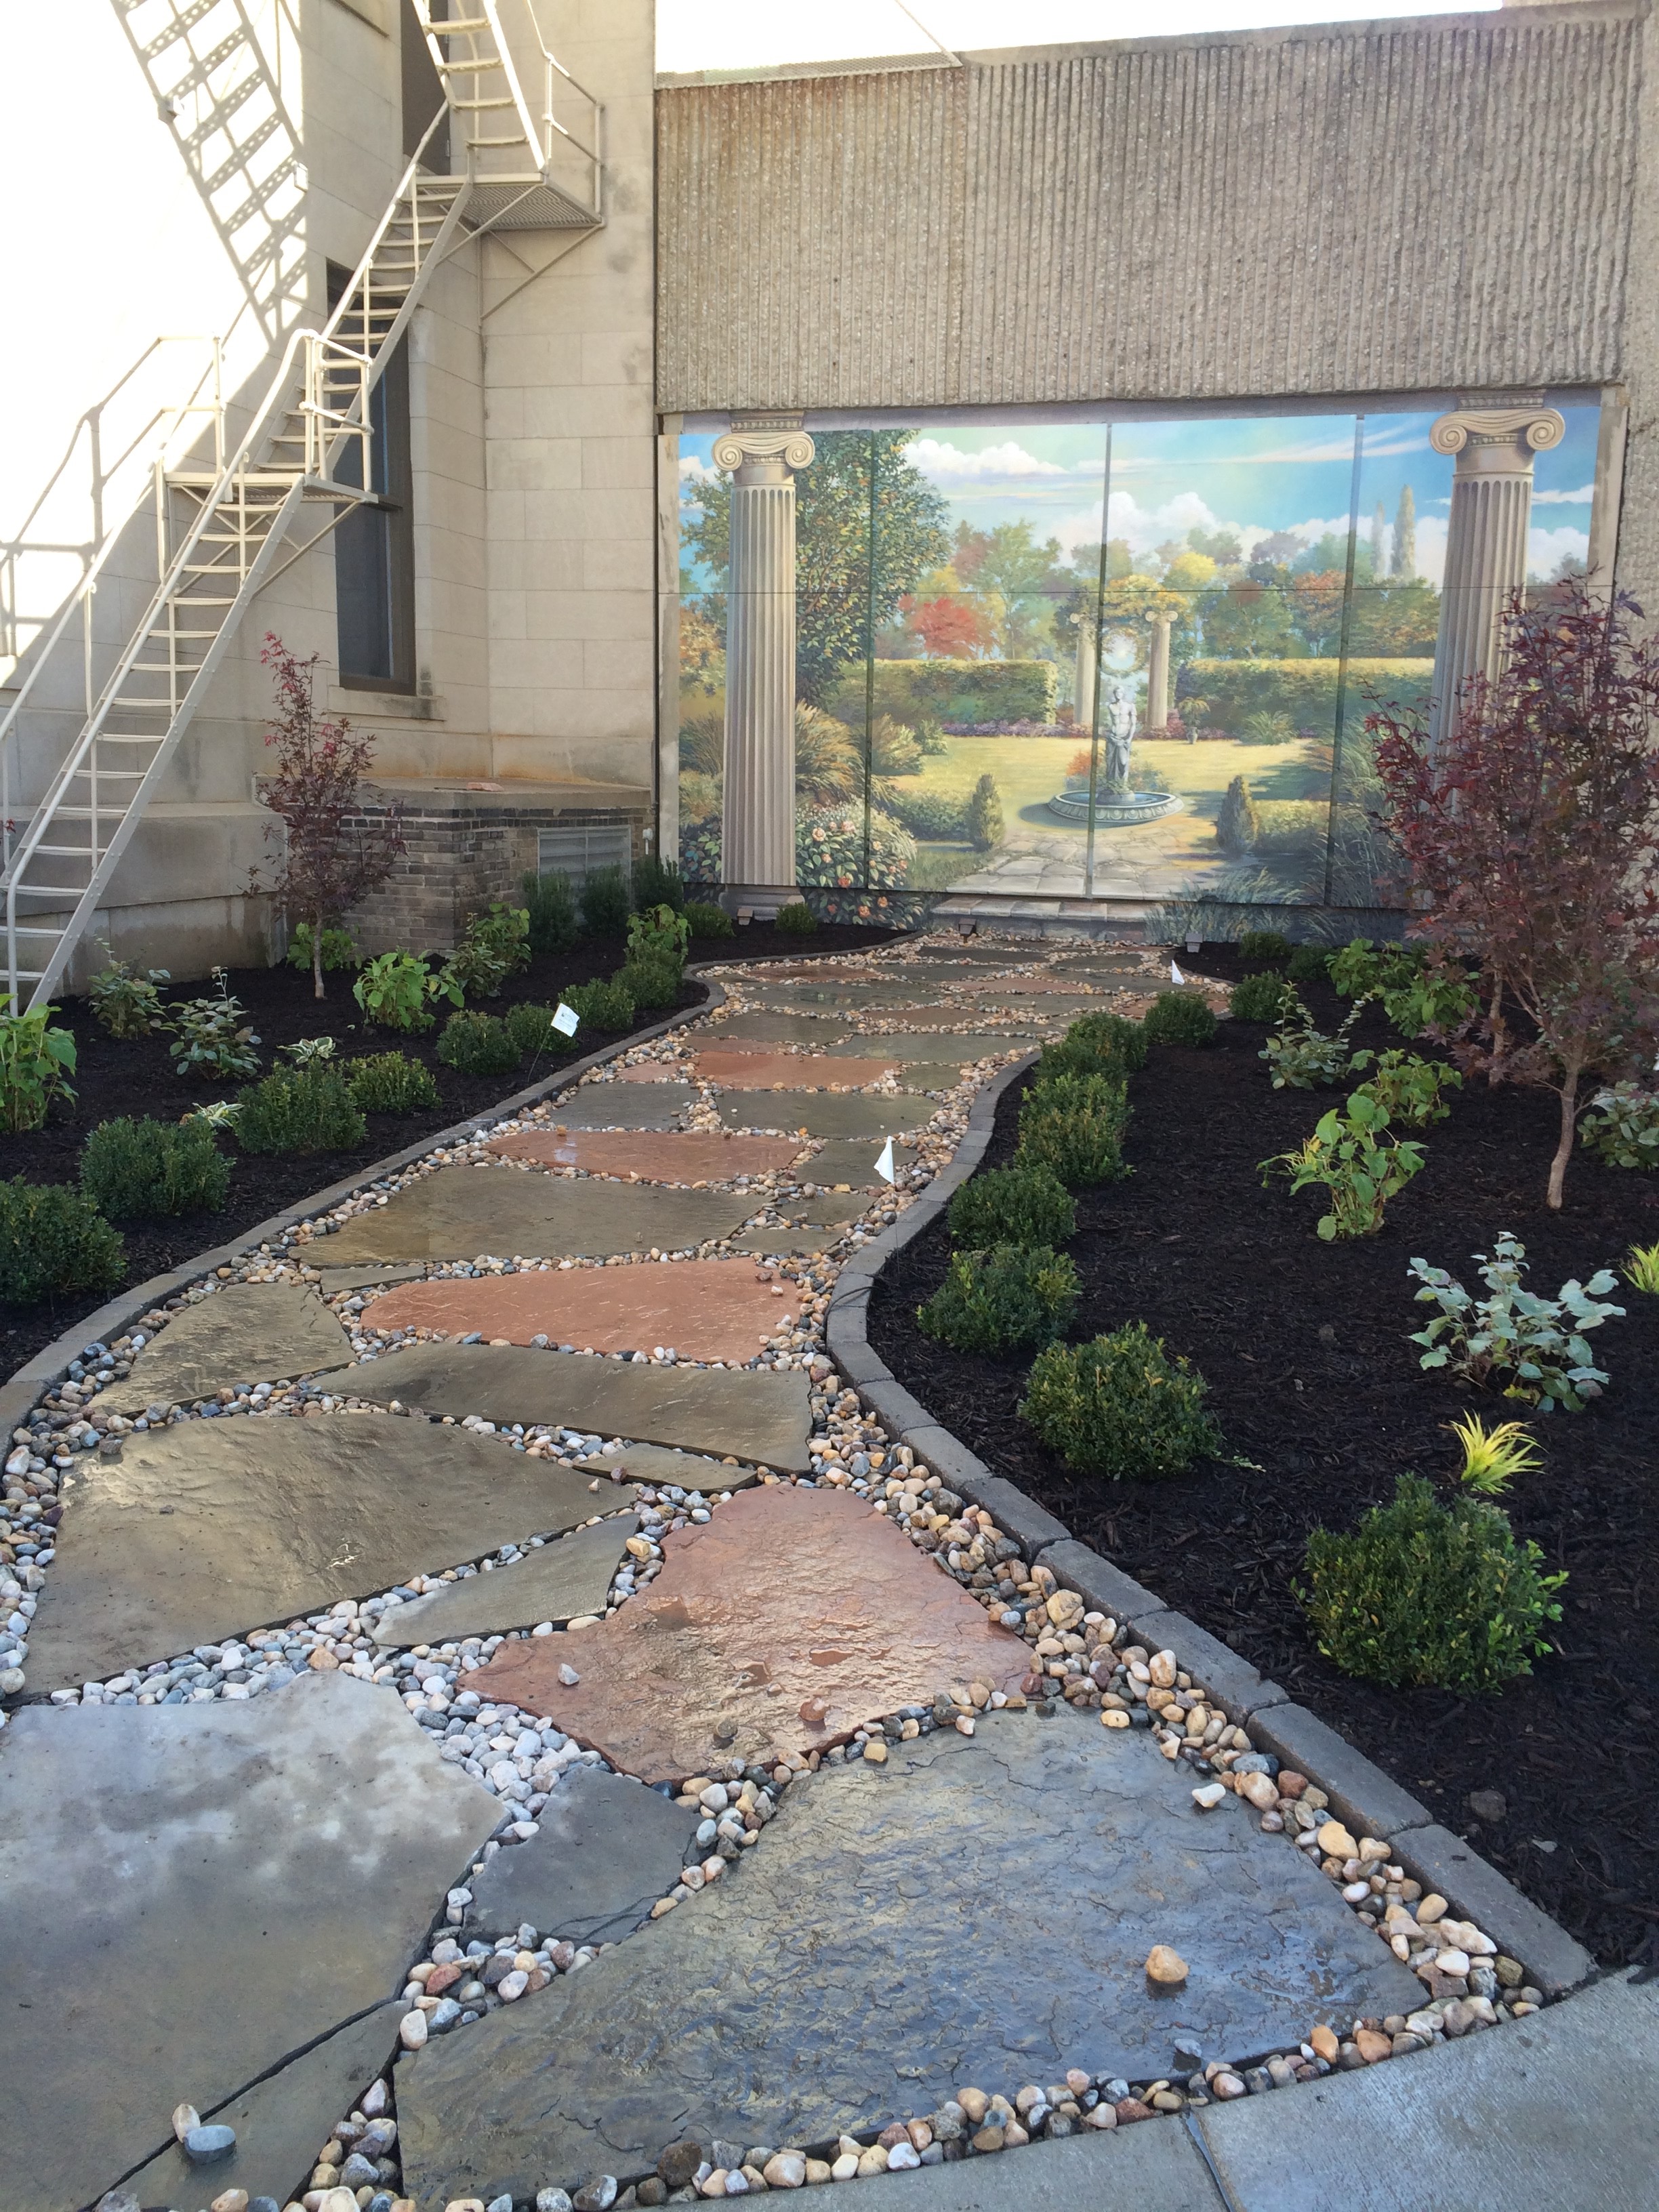  The Scottish Rite Mural and Garden, dedicated in October 2015 